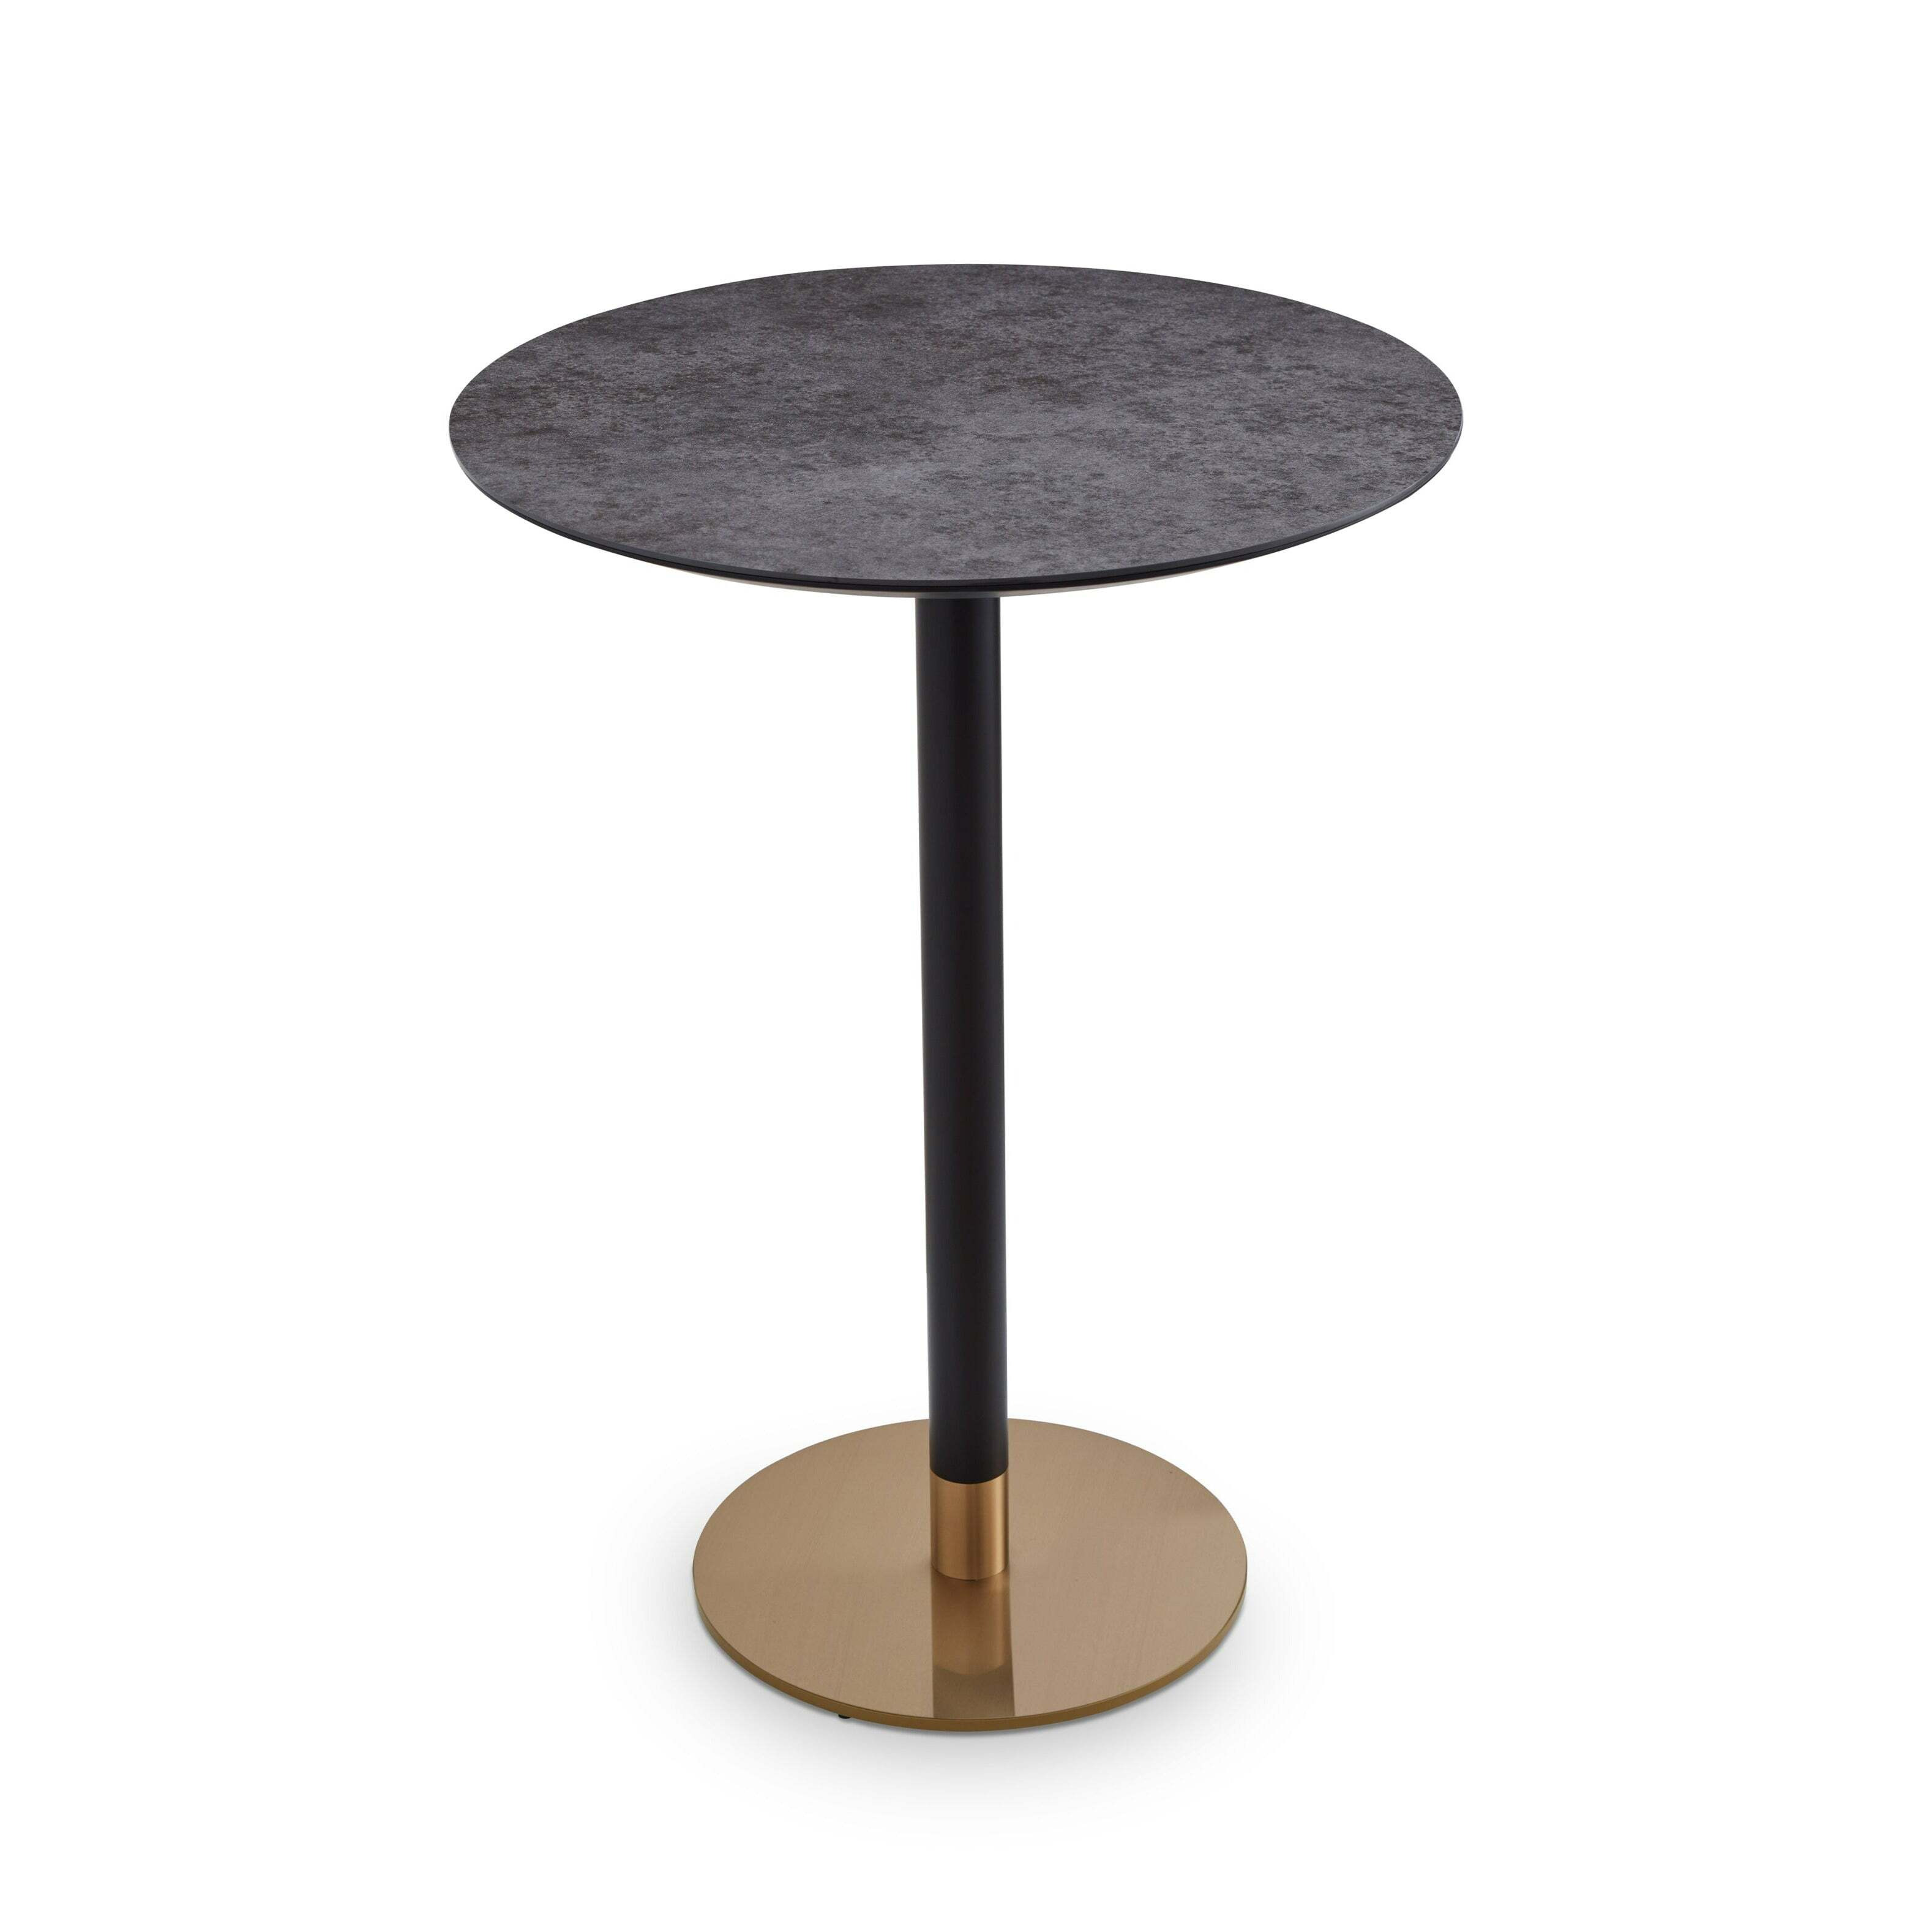 Liang & Eimil Theodore Bar Table in Dark Grey - image 1